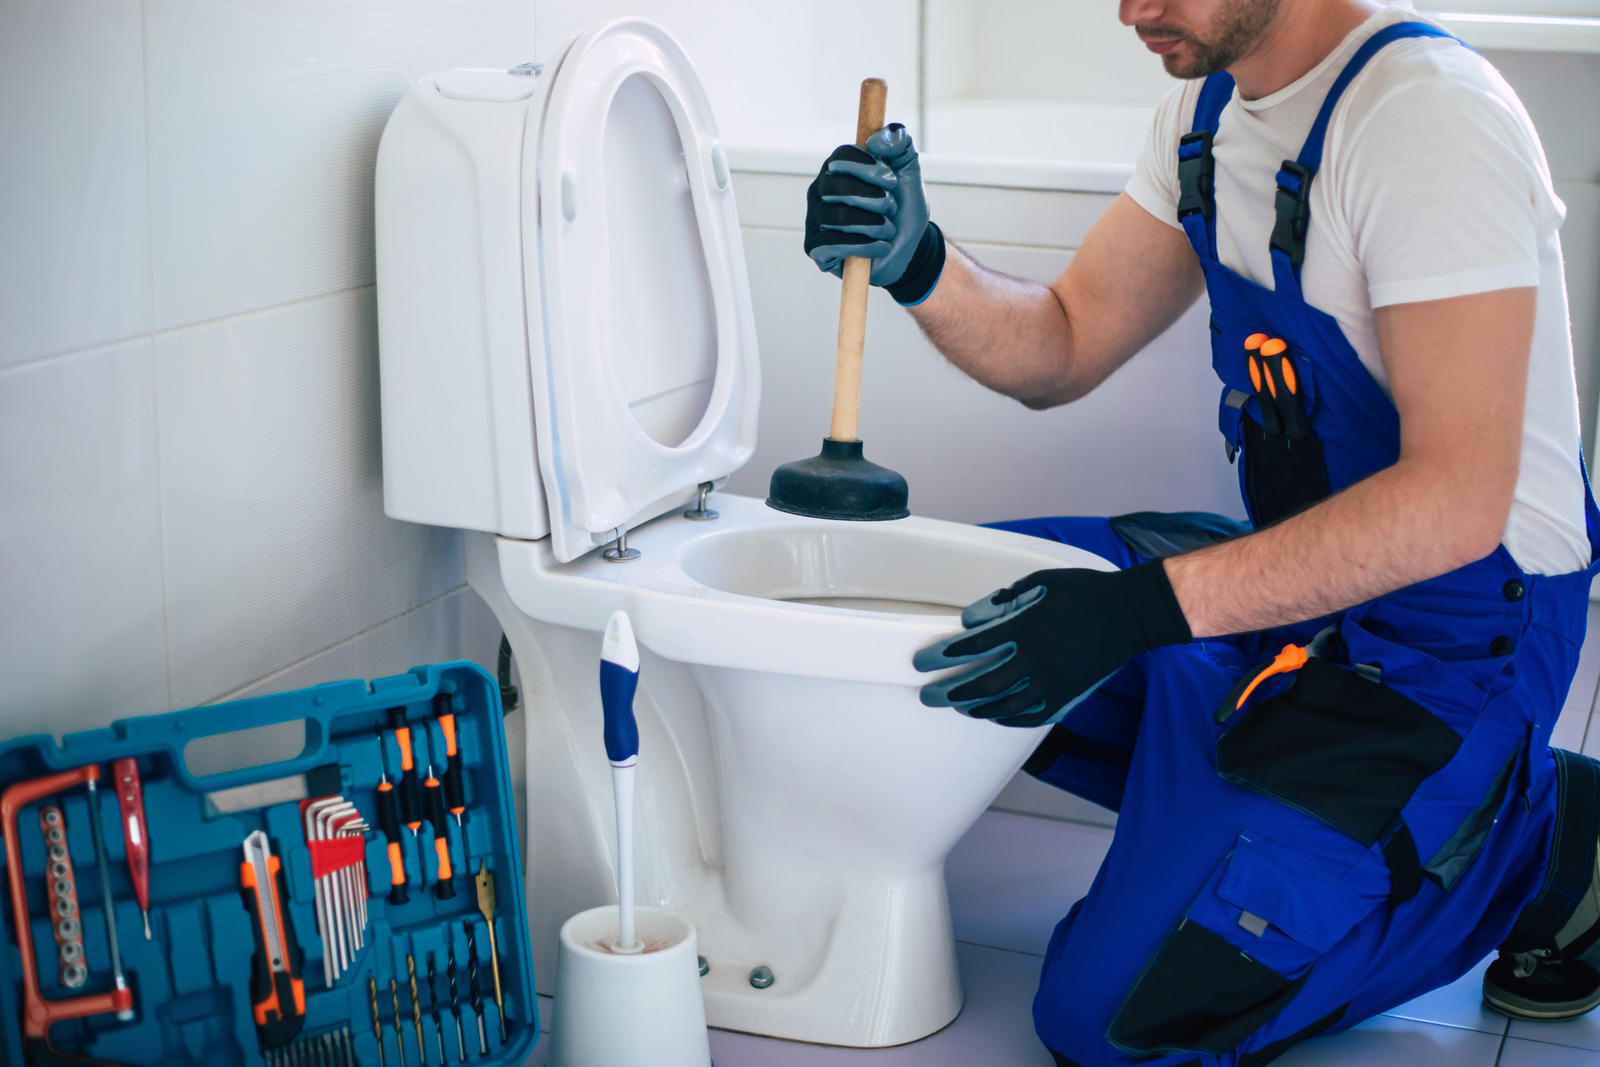 A2B Plumbing technician in Burnaby, BC, repairing a malfunctioning toilet in a residential bathroom